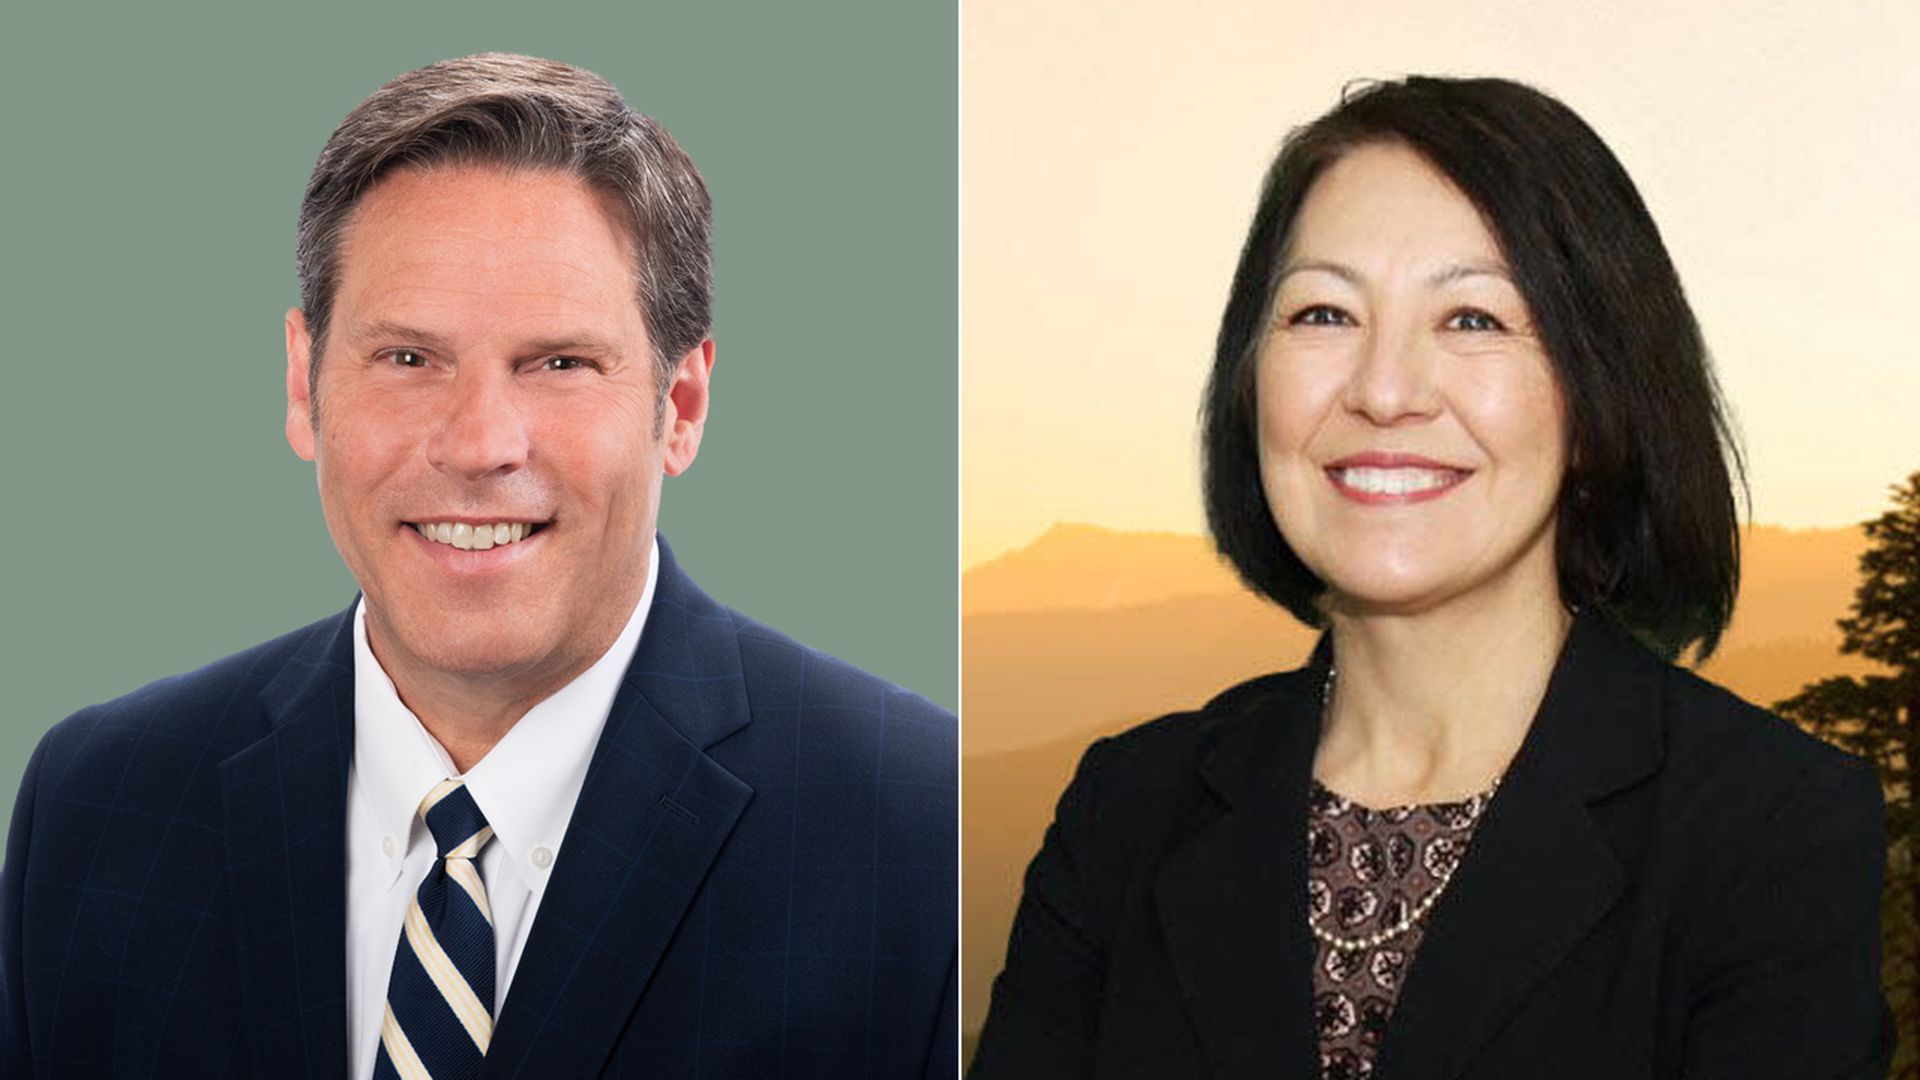 Jim Ferrell and Leesa Manion are running for King County's open prosecutor's seat.